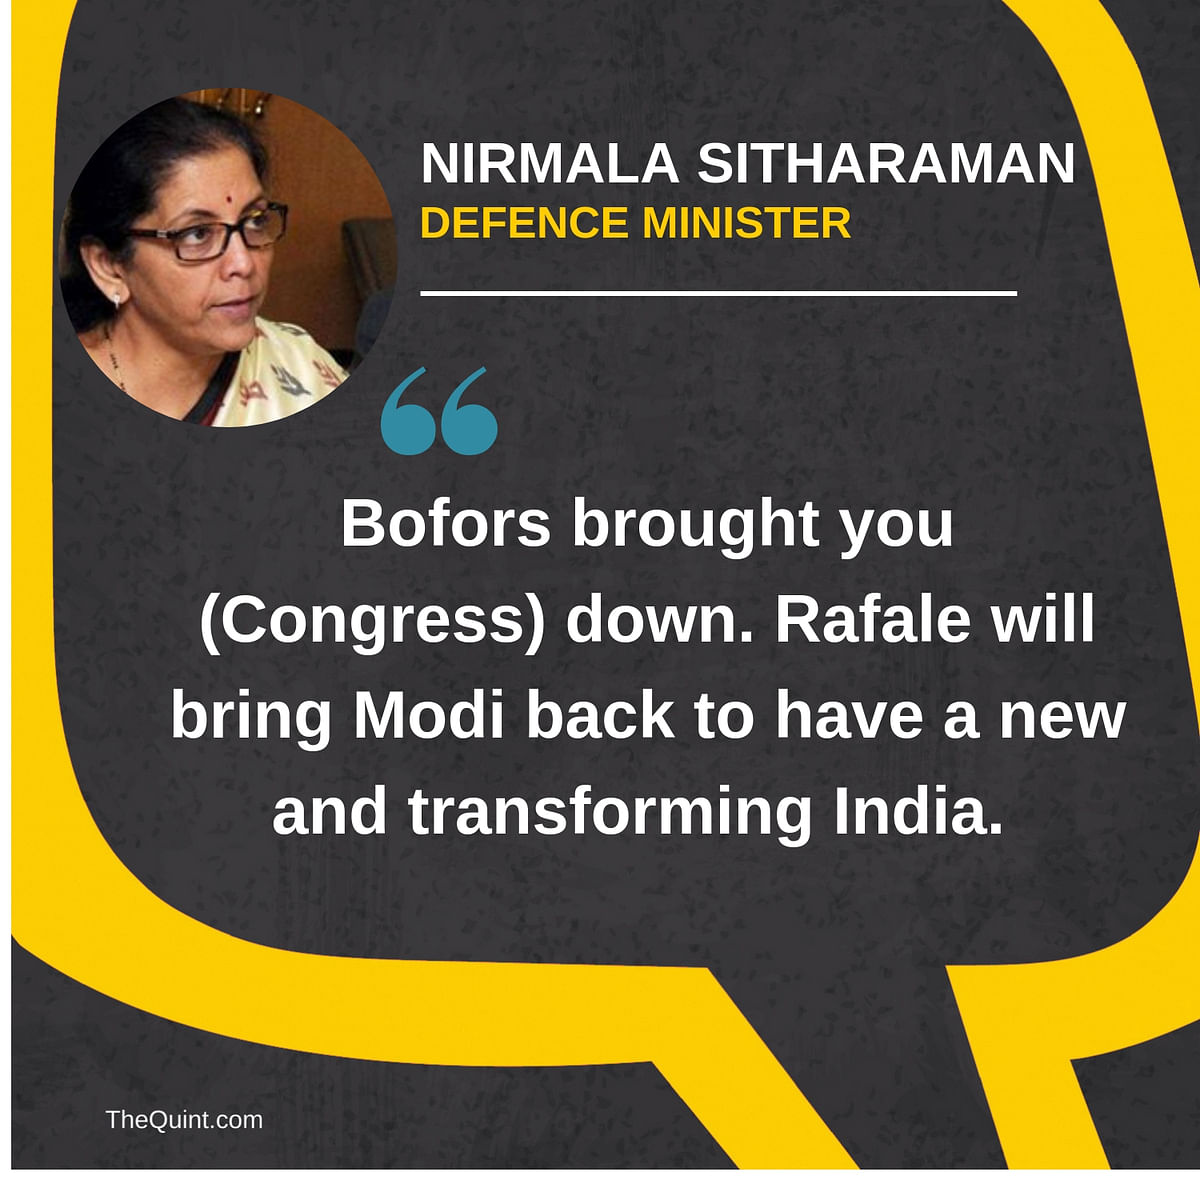 Here’s a recap of what went down during the Rafale debate between the Cong president and the defence minister in LS.